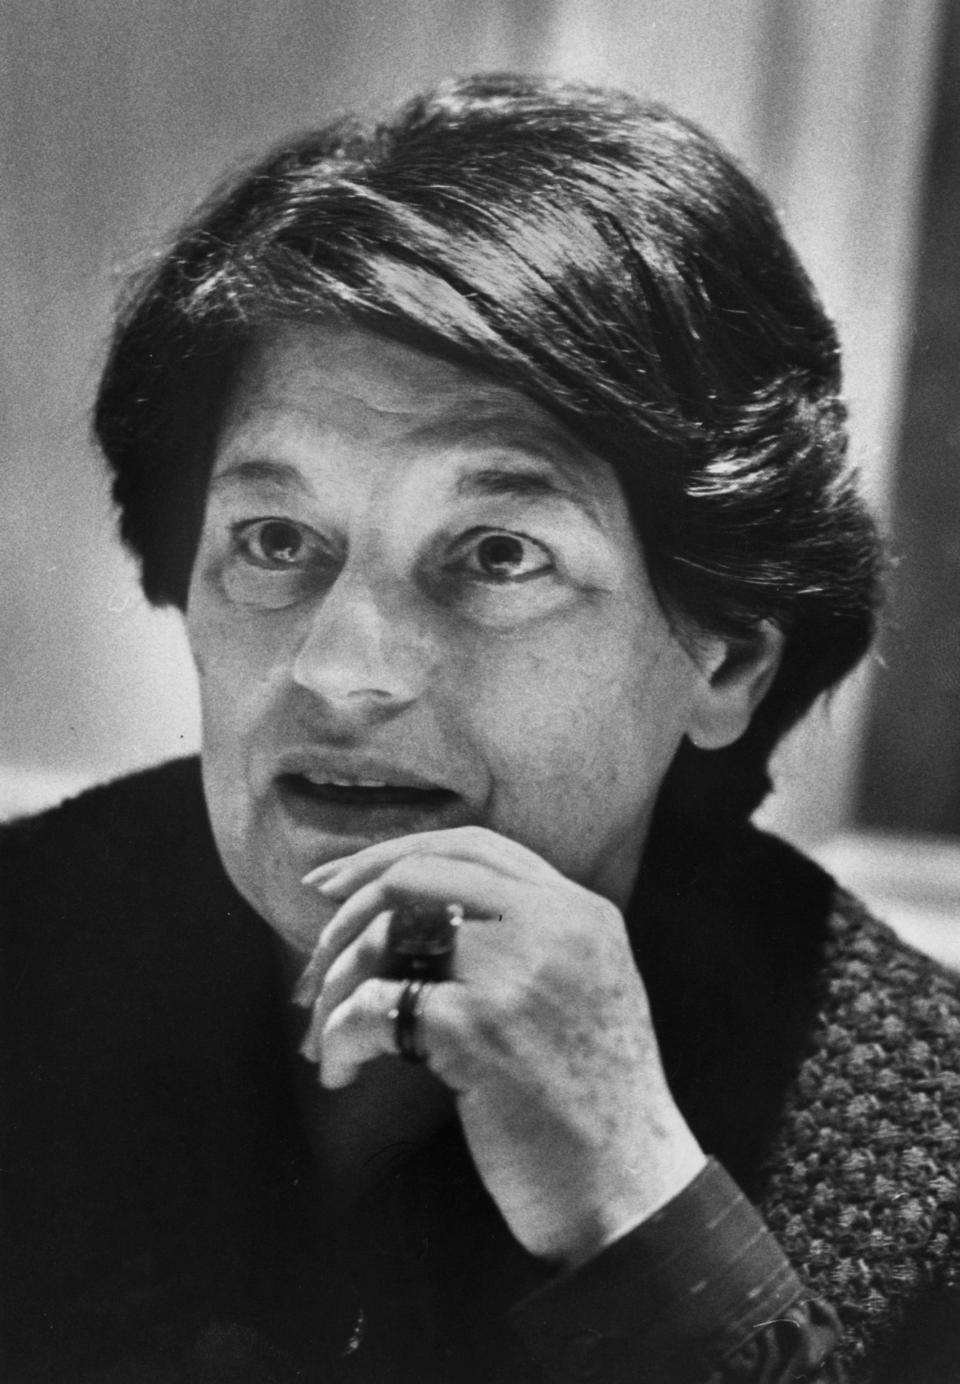 In this Wednesday, Oct. 28, 1981 photo, Mavis Gallant is shown in Montreal. Gallant, the Montreal-born writer who carved out an international reputation as a master short-story author while living in Paris for much of her life, has died at age 91, her publisher says. (AP Photo/The Canadian Press, Ian Barrett)